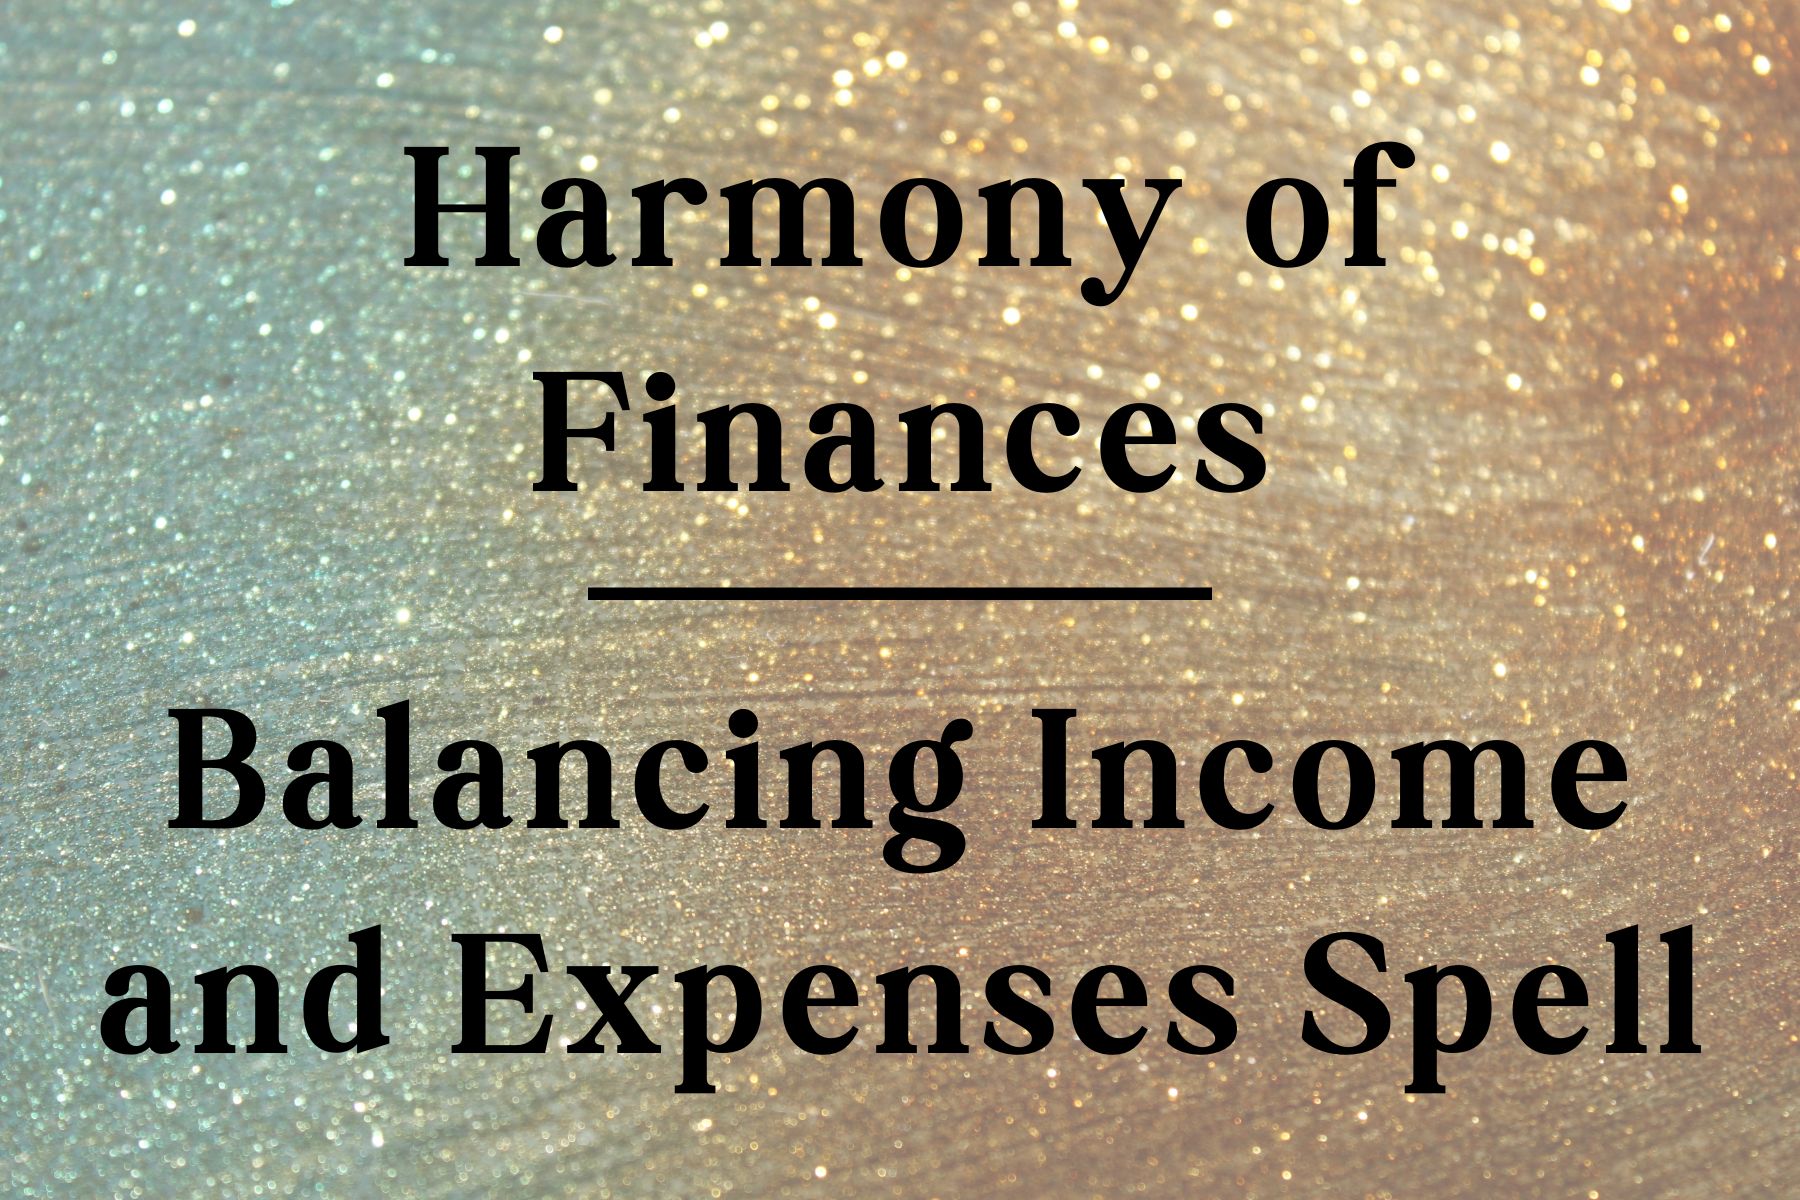 Financial Harmony: Balancing Income and Expenses Spell